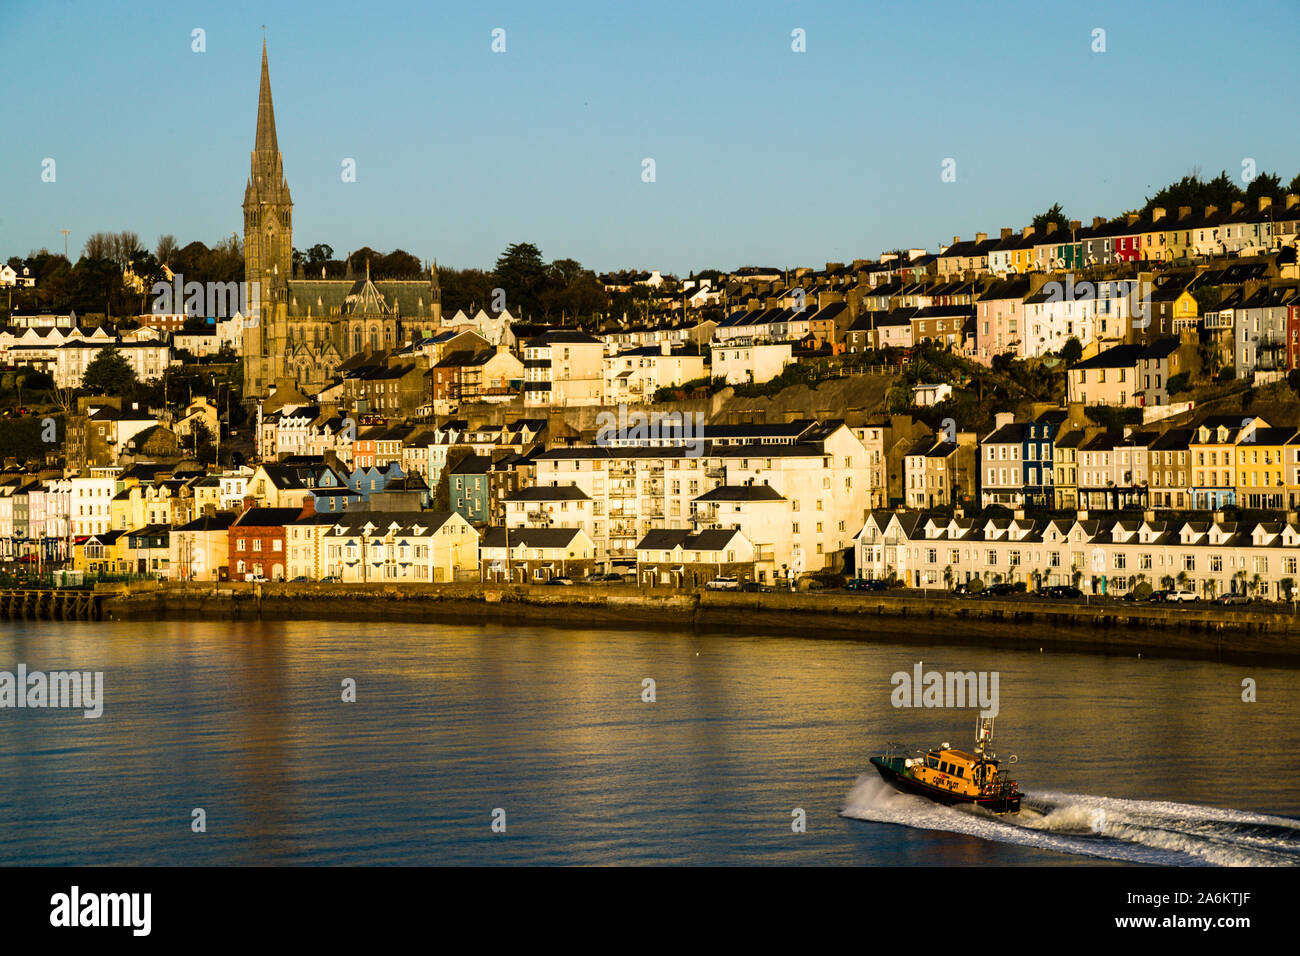 The pilot's boat accompanies the ferry in Cork Bay. Harbor view of Cork in Ireland Stock Photo